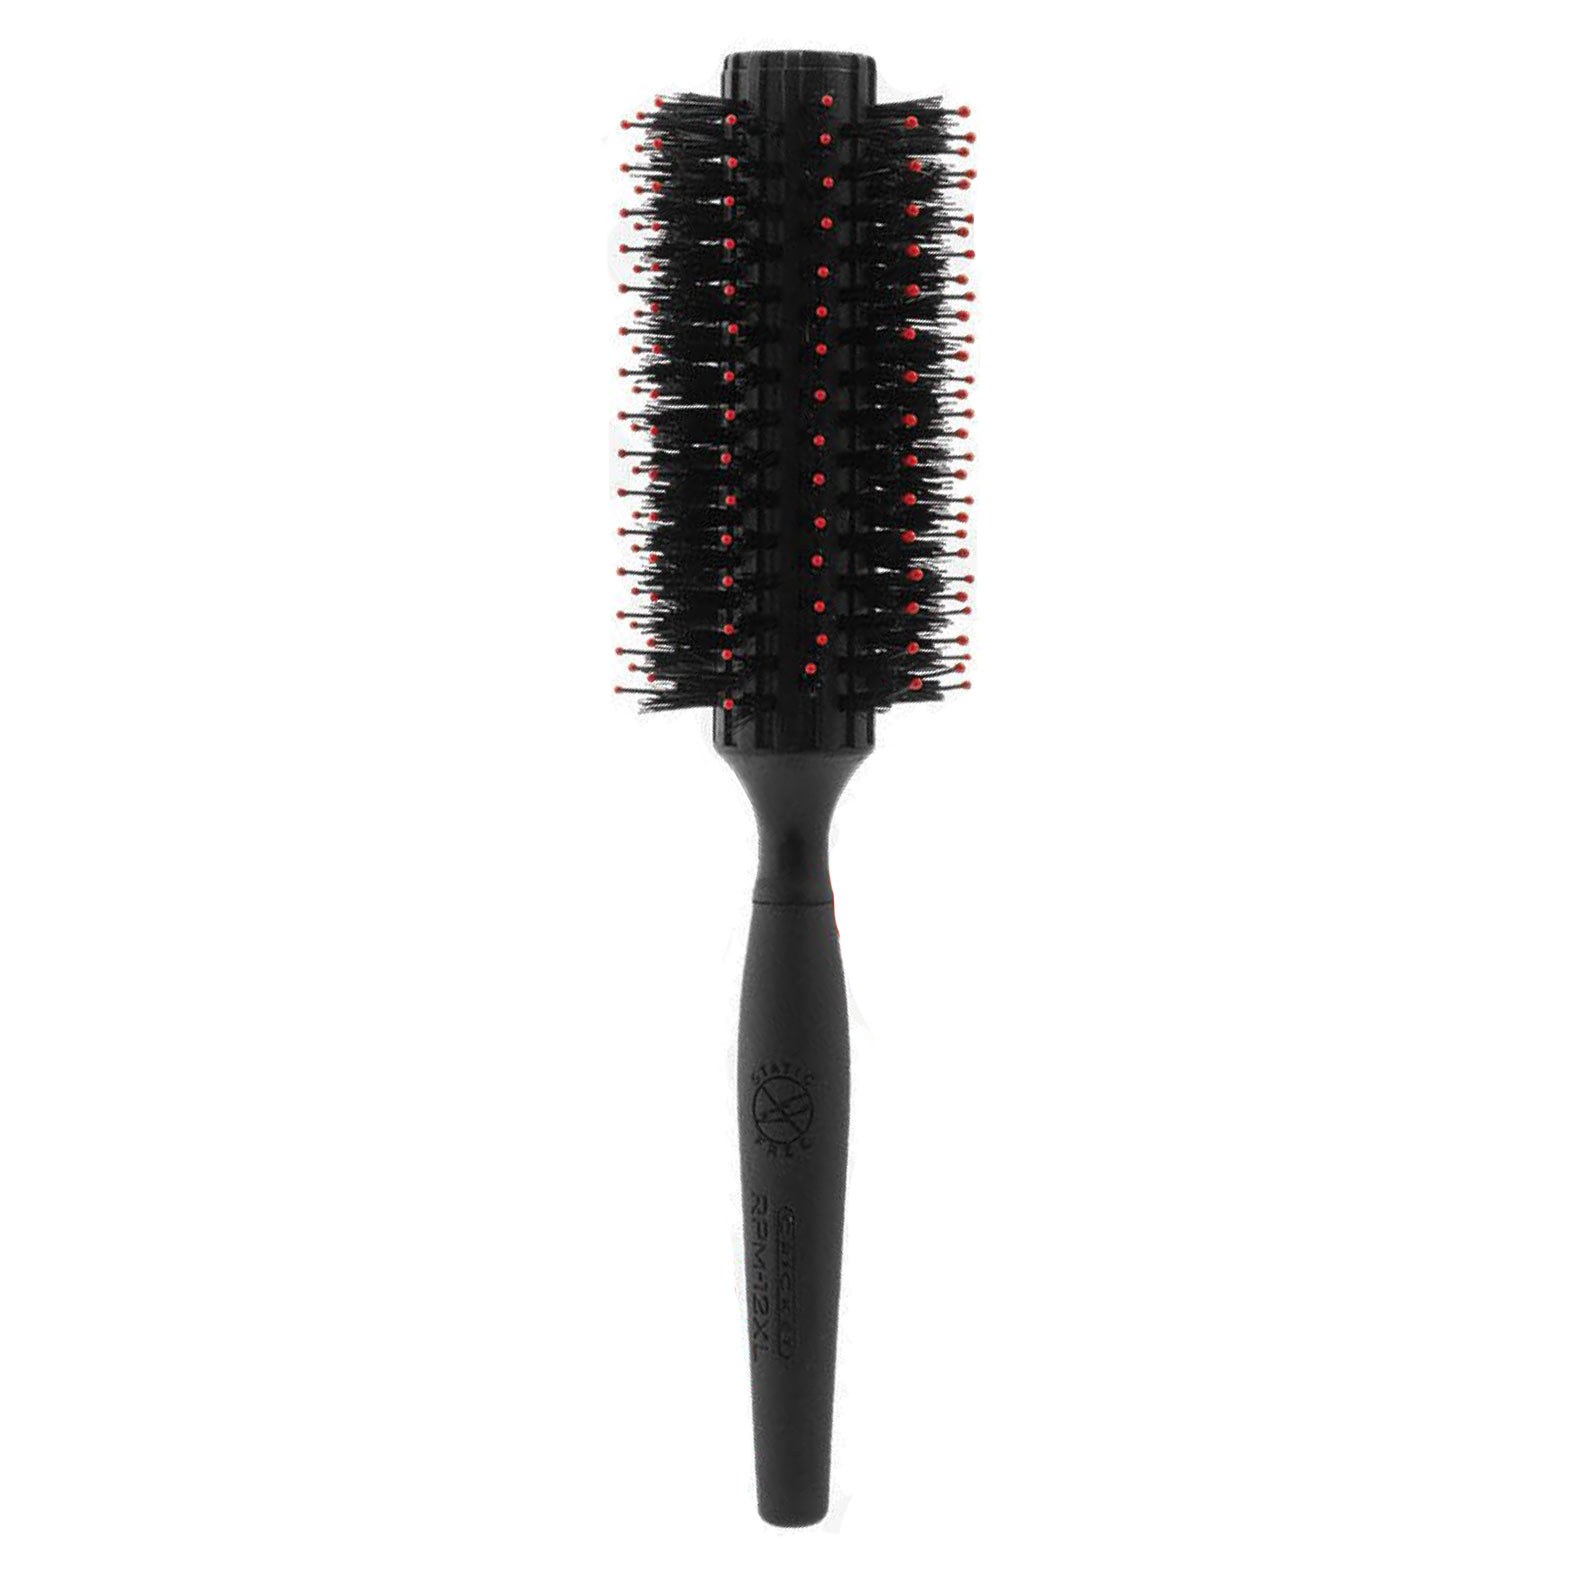 Cricket BRUSHES: Static Free RFM-12 Deluxe Boar Brush